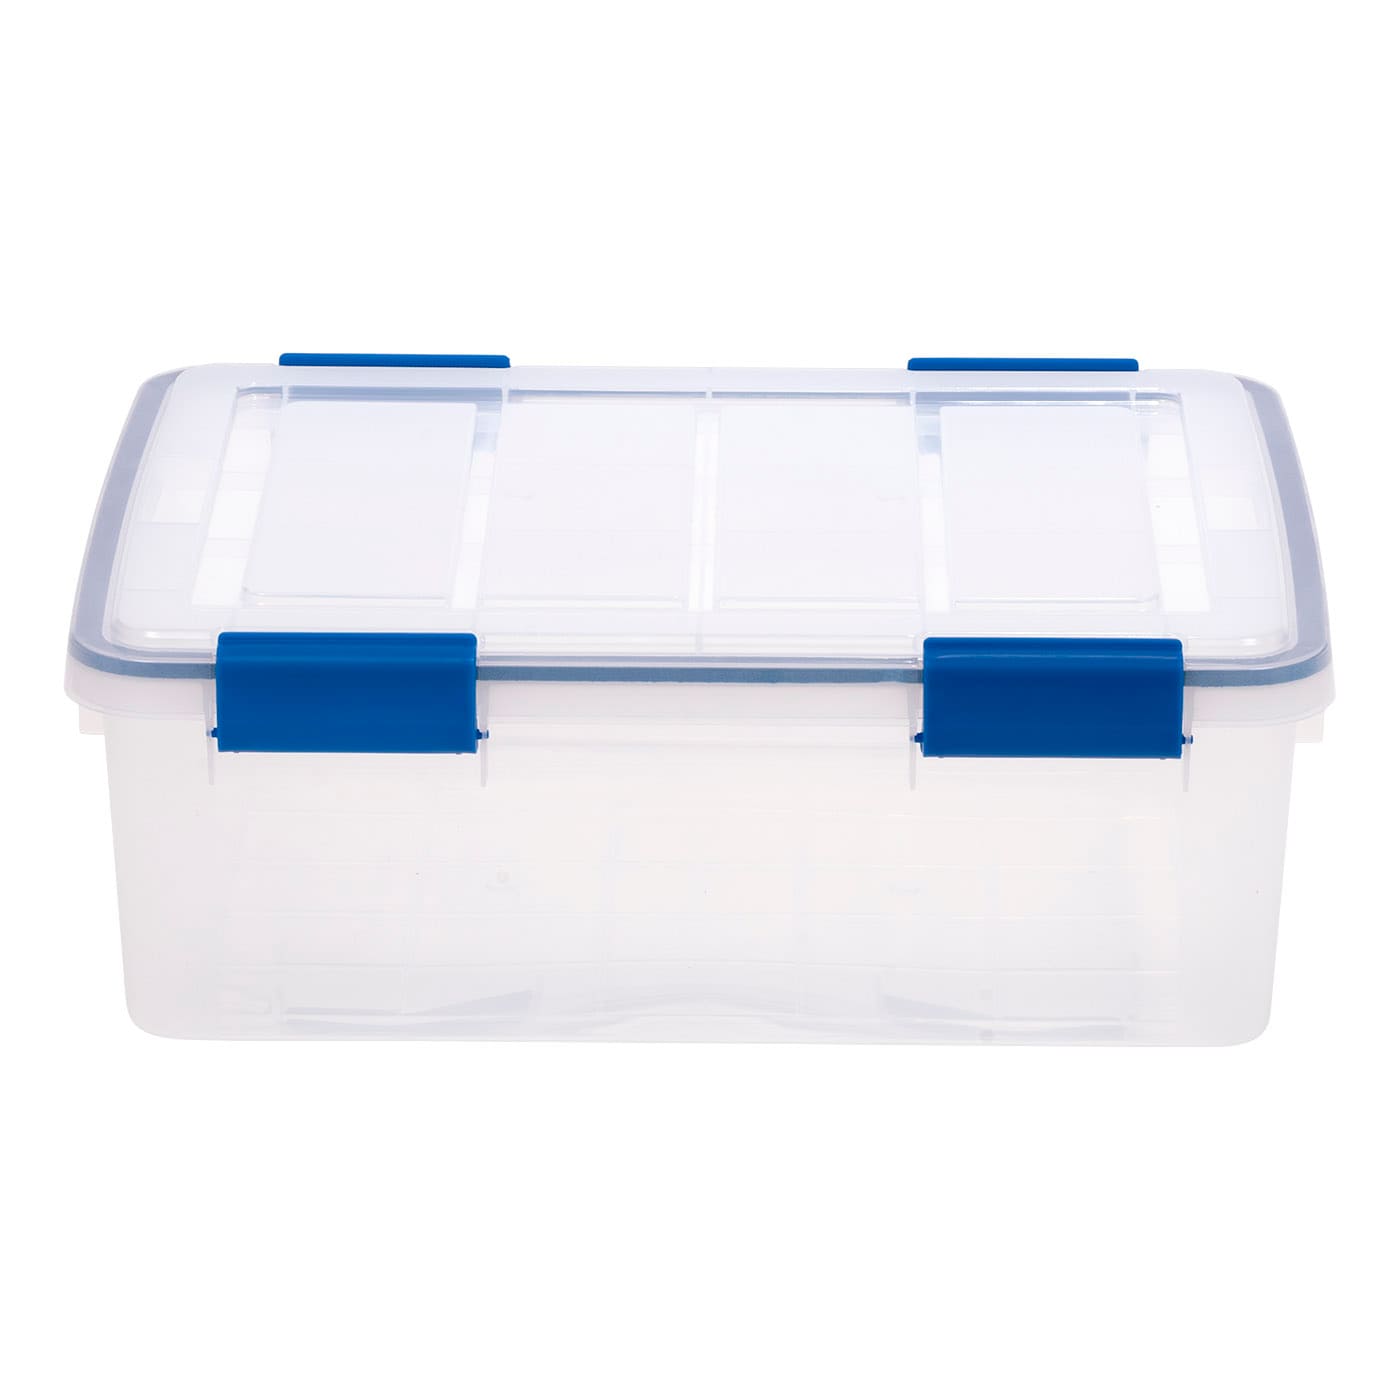 Clear Weathertight Totes